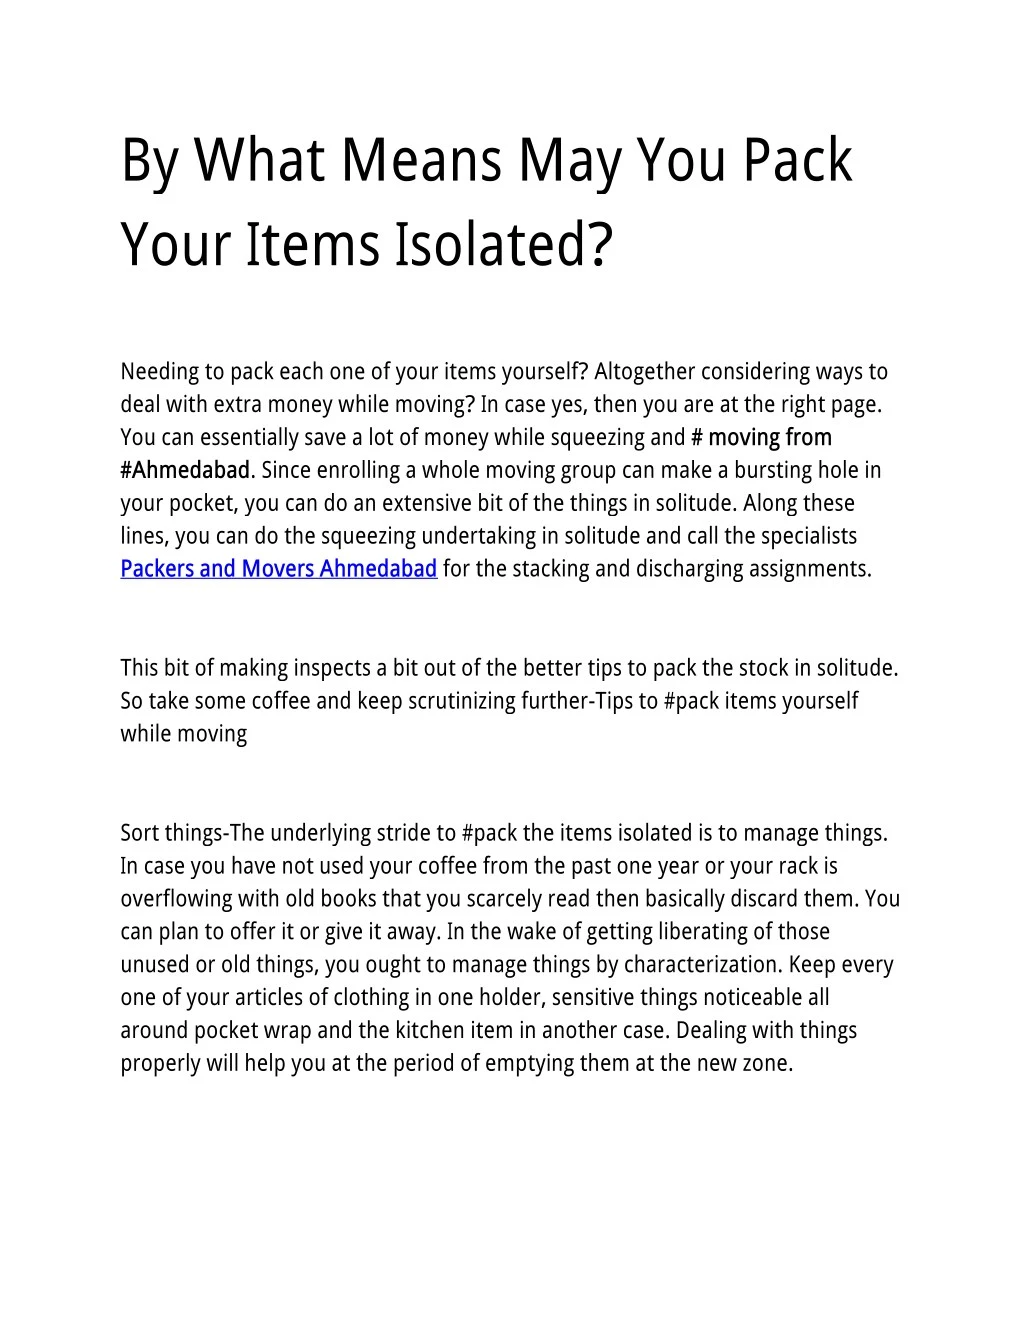 by what means may you pack your items isolated